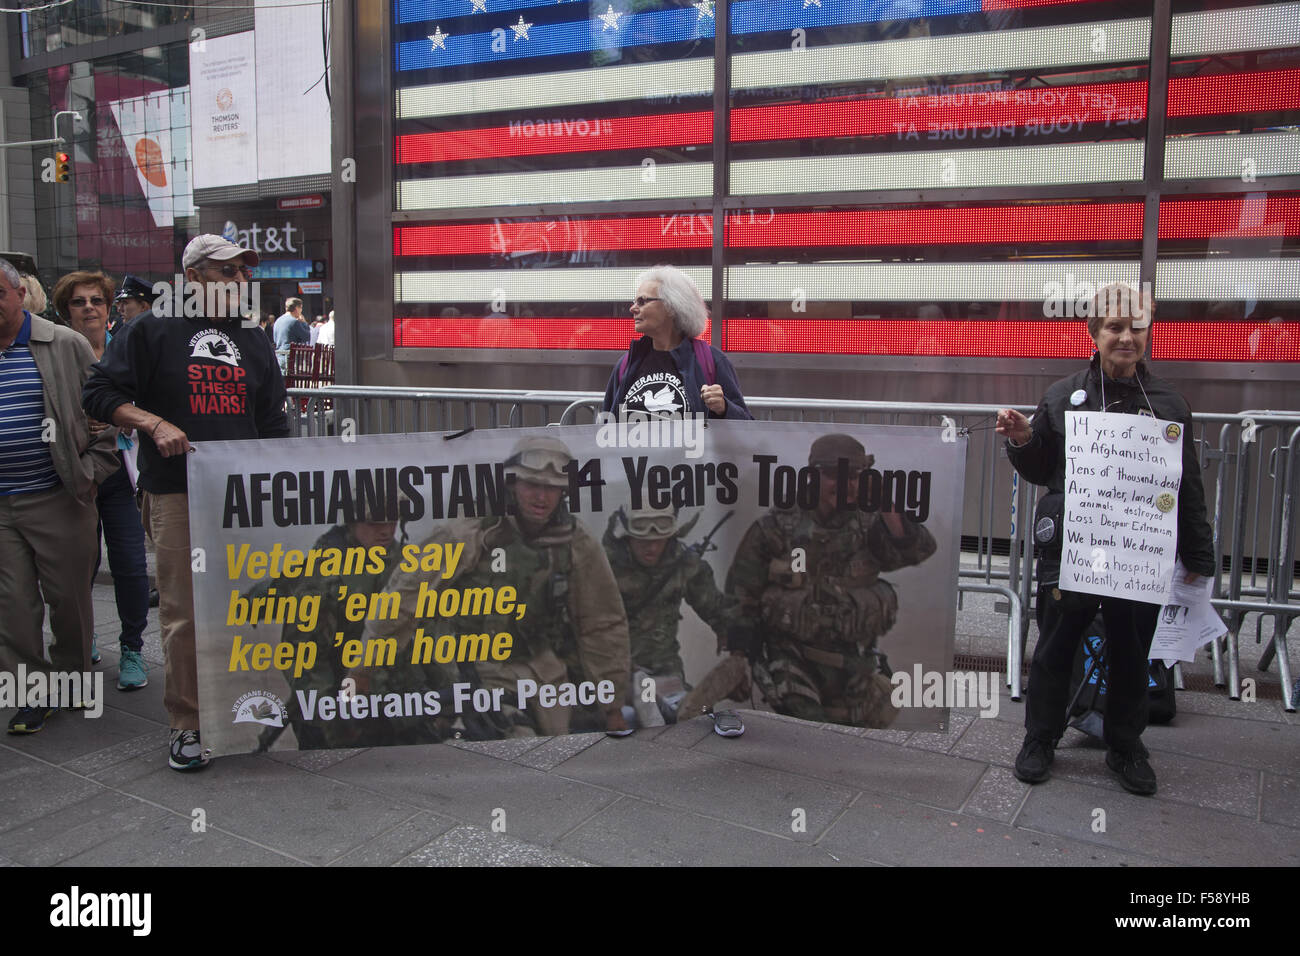 Peace activists demonstrate against keeping American Troops in Afghanistan at Military recruitment office in Times Square NYC. Stock Photo